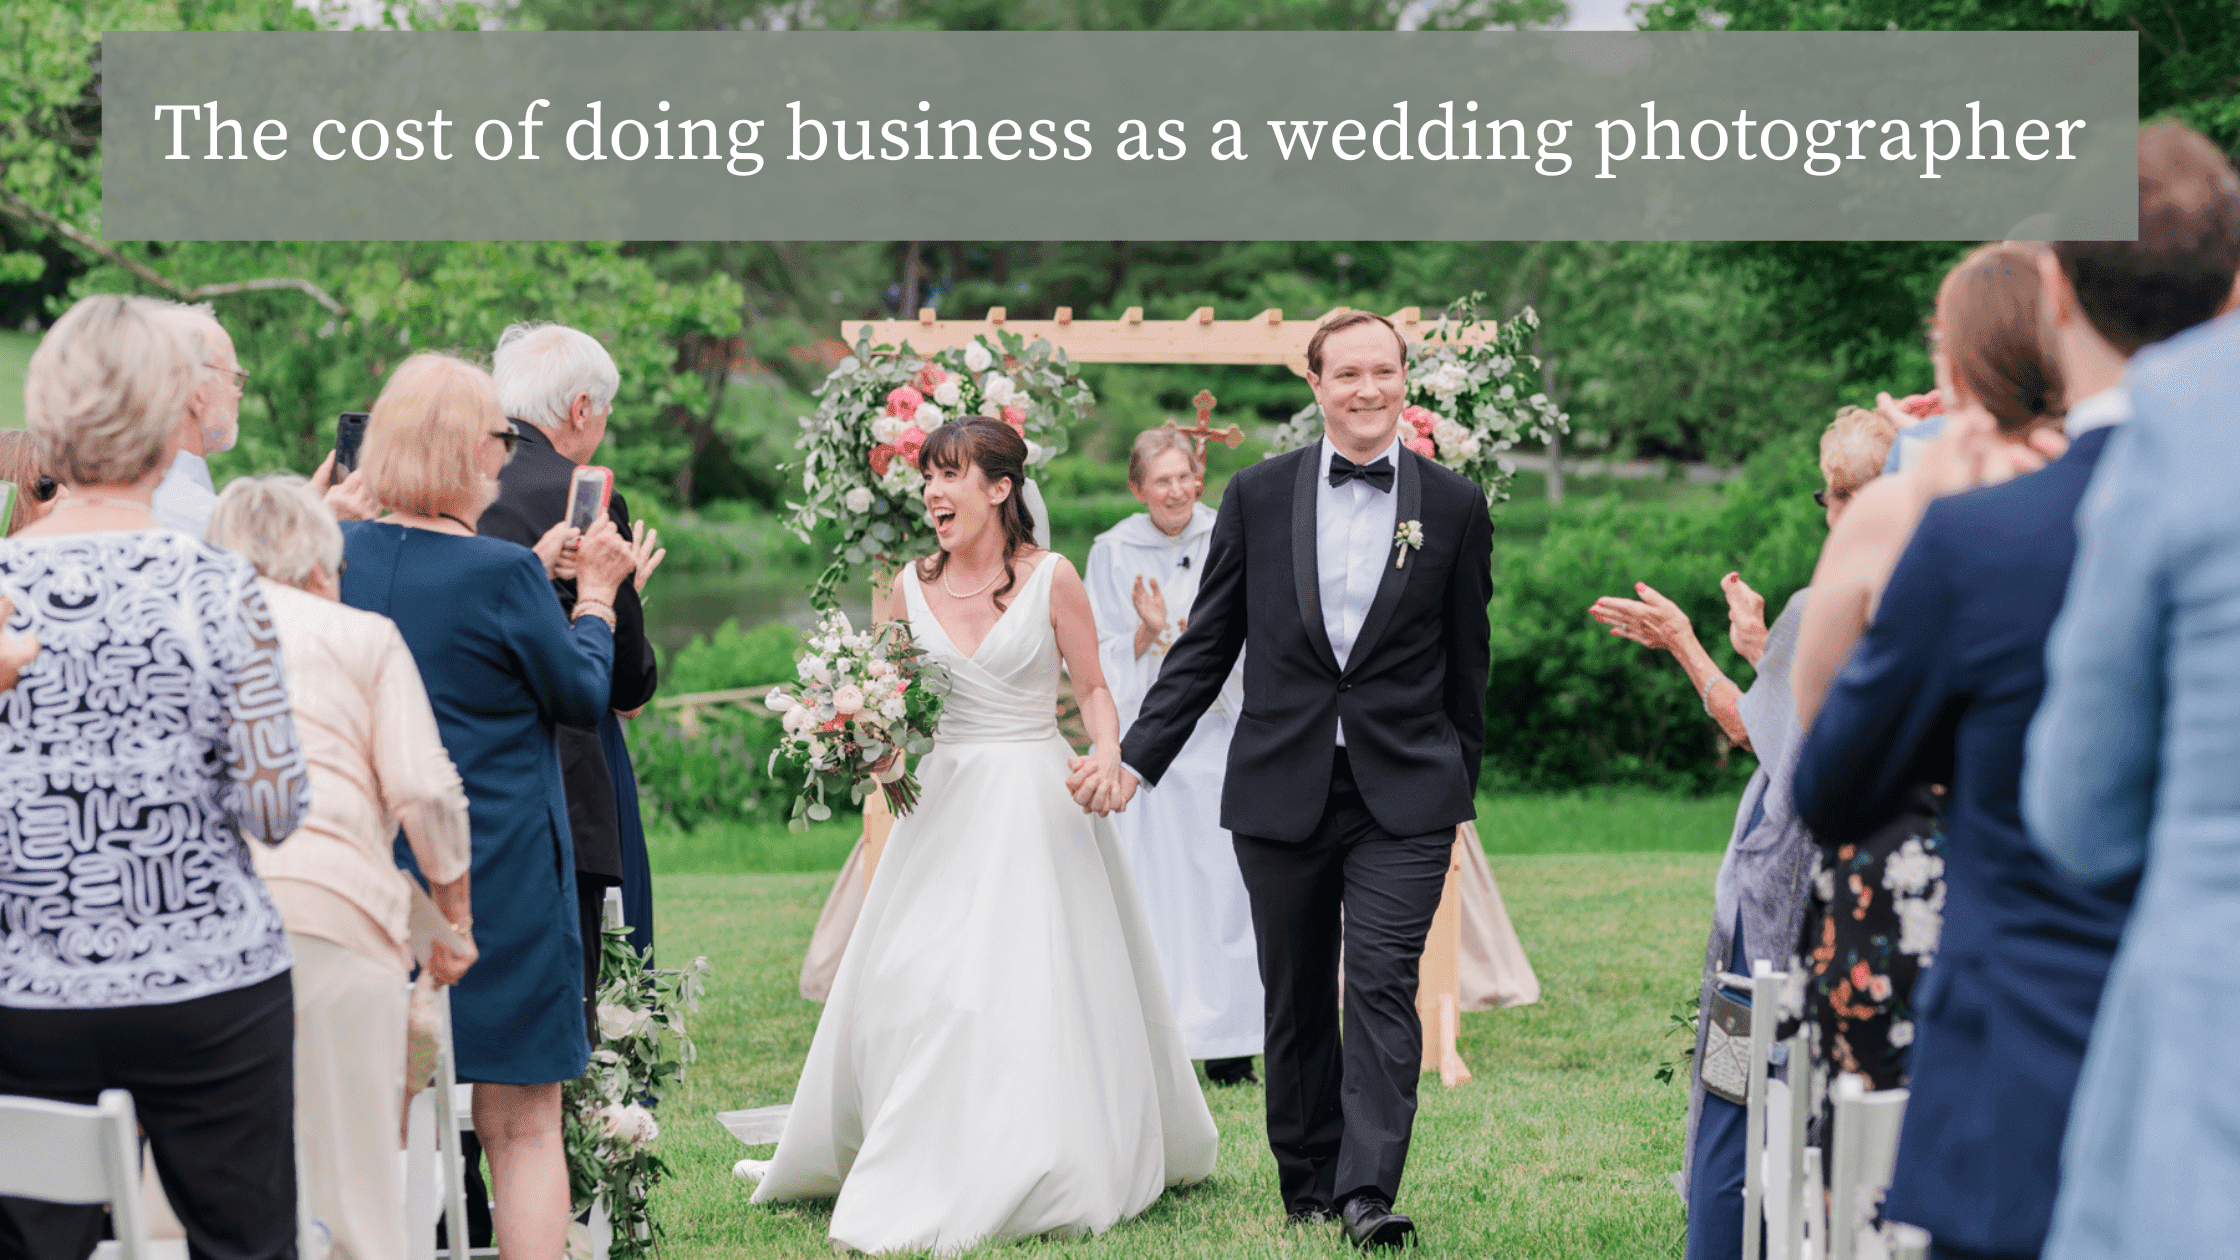 A bride and groom smile and walk back down the aisle at their sunny outdoor summer wedding after being pronounced husband and wife. Text at the top of the image reads: 